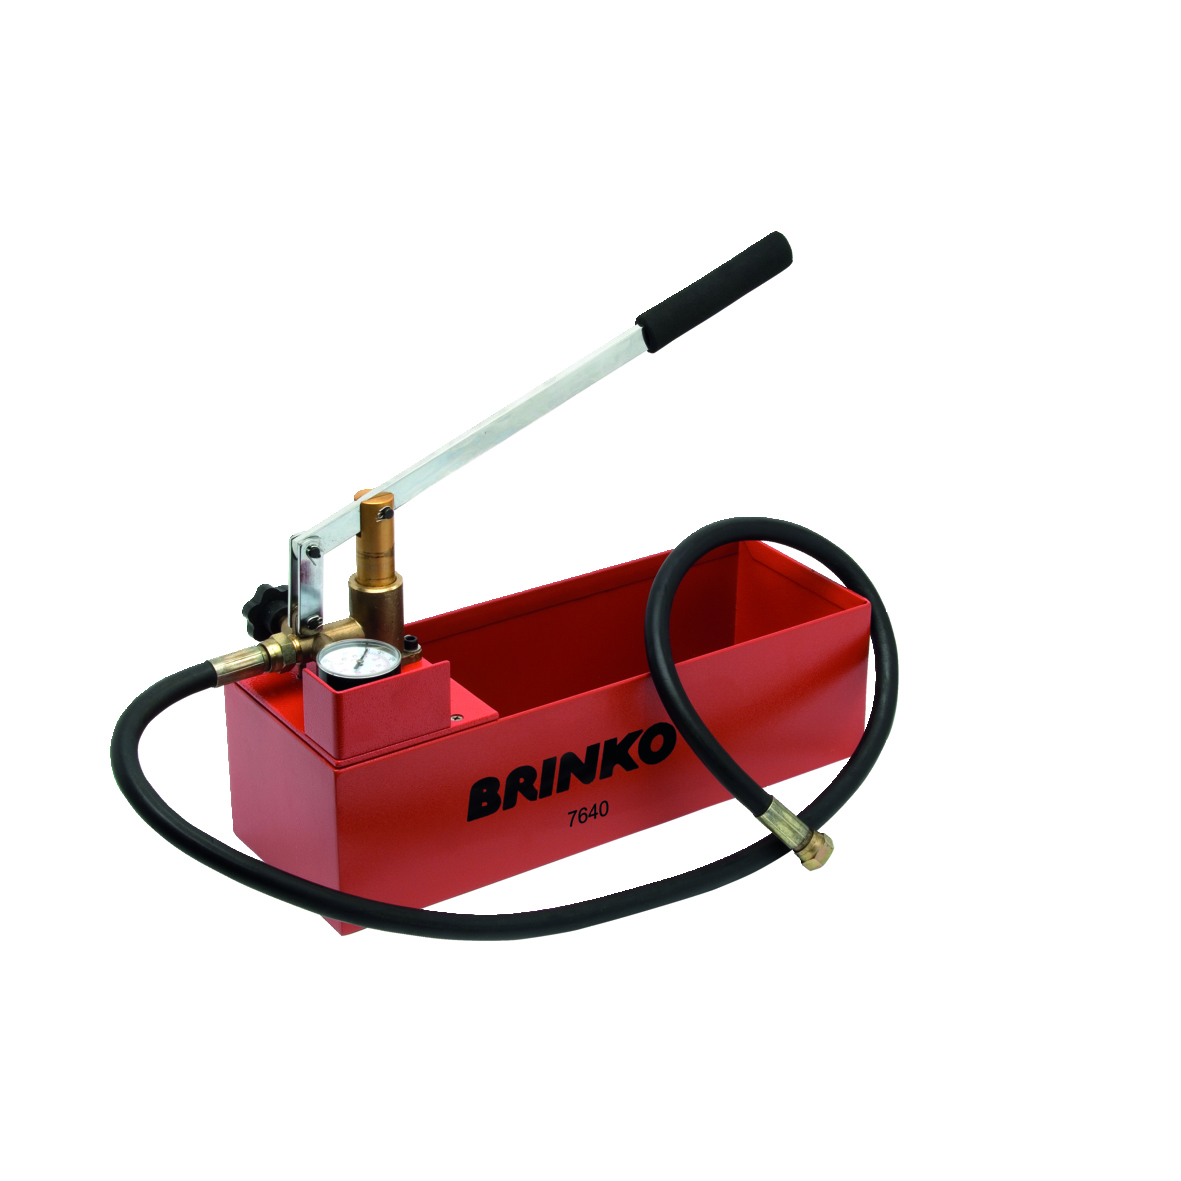 Pressure testing pump  Range of professional tools for industry and